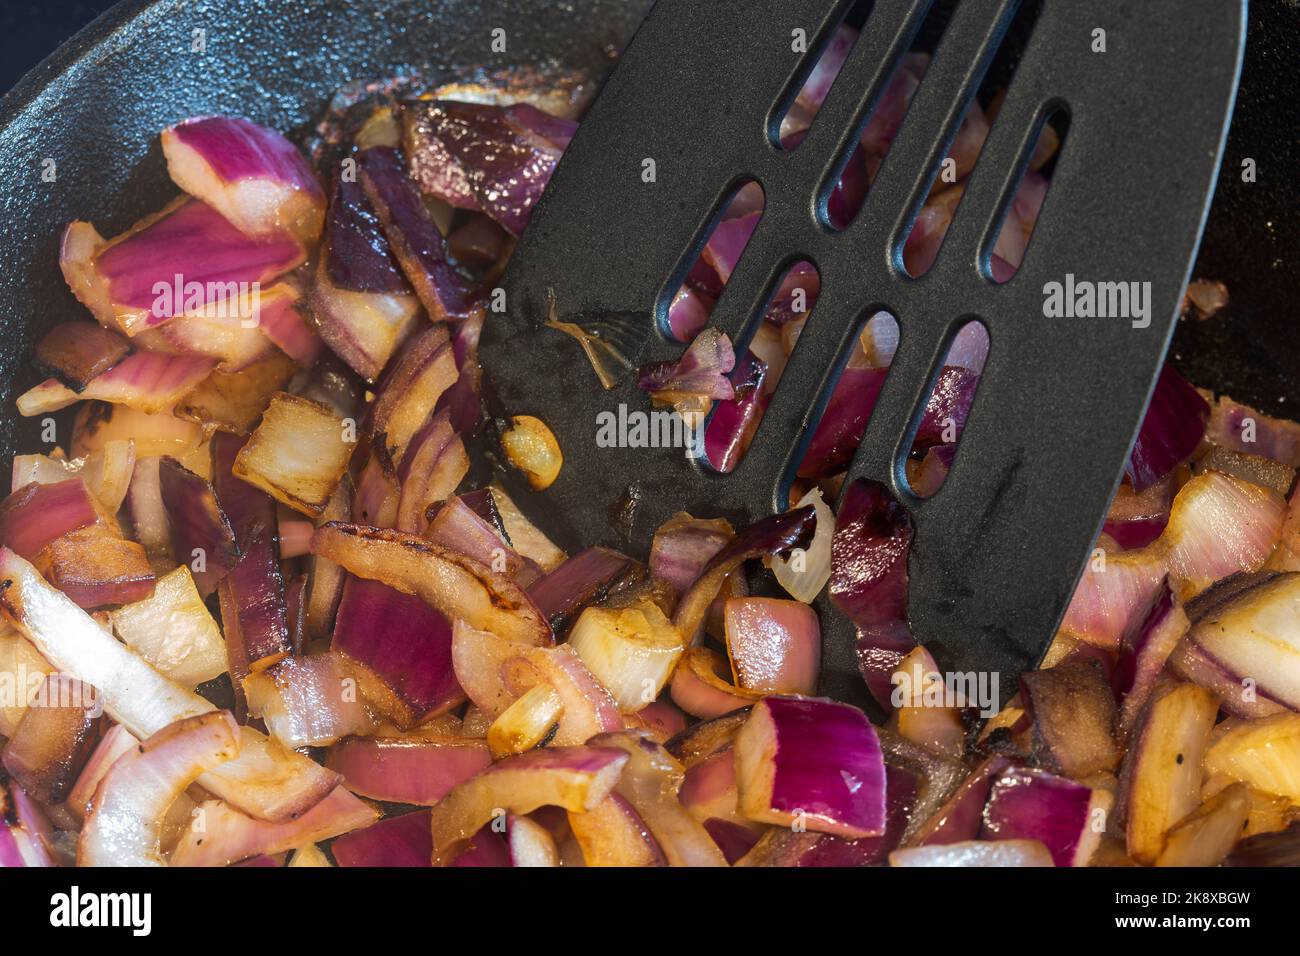 Frying red onions, with olive oil, in a cast iron frying pan, on an electric hob stove. Stock Photo